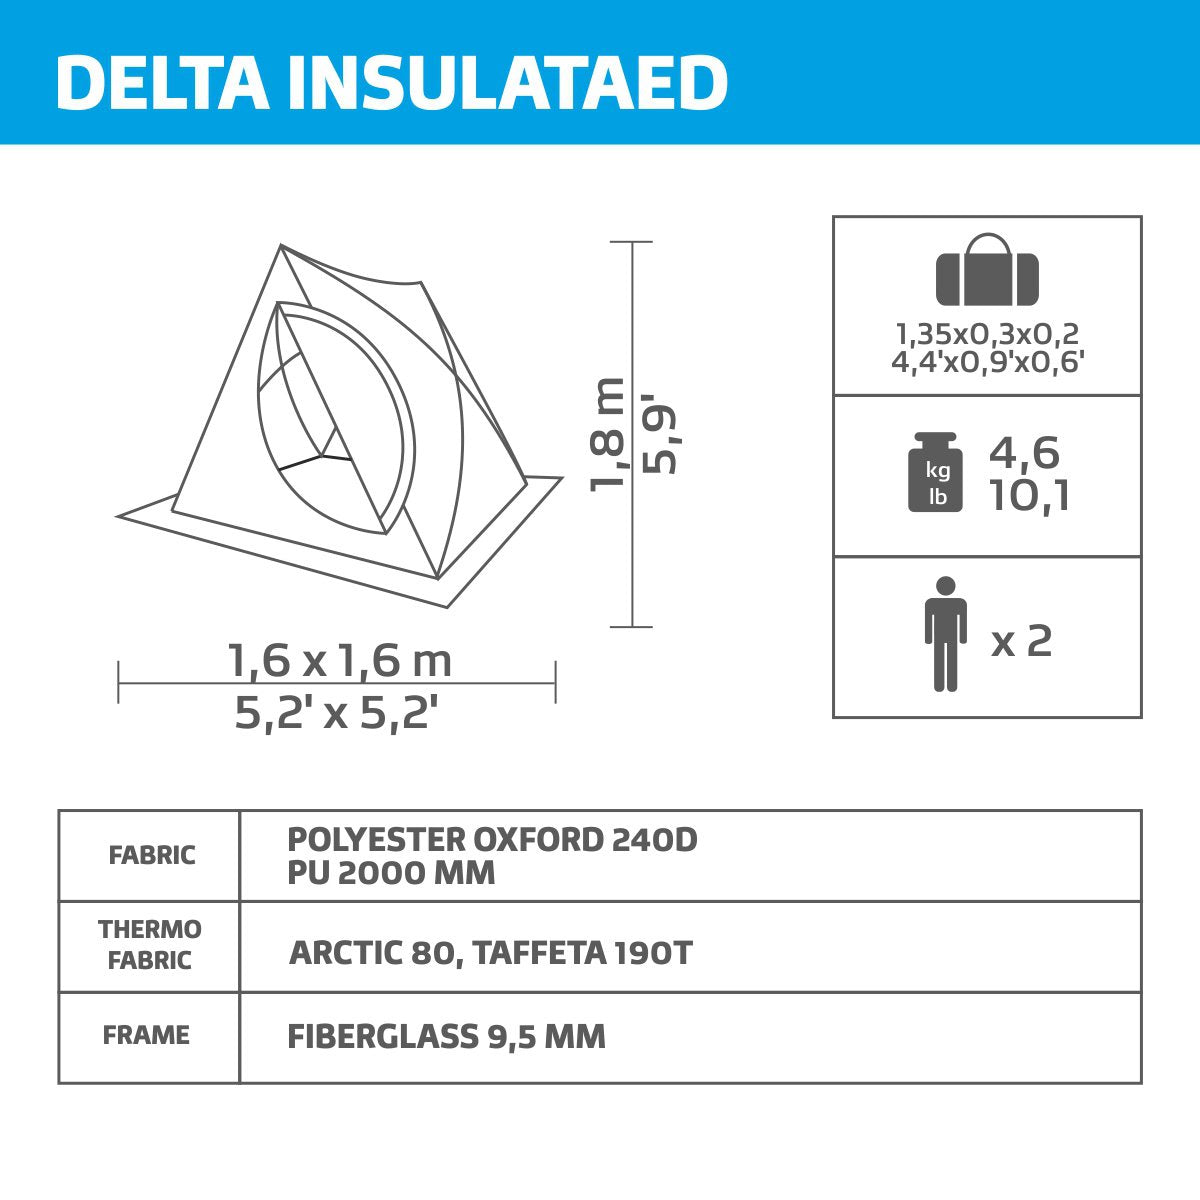 Delta Portable Insulated Ice Fishing Tent Shelter for 2 Persons is made of polyester oxford 240 d PU 2000 mm, insulated with Arctic 80 and Taffeta 190T thermo fabric. The frame is made of 9.5 mm fiberglass. Weighs 10.1 lbs, carrying bag attached